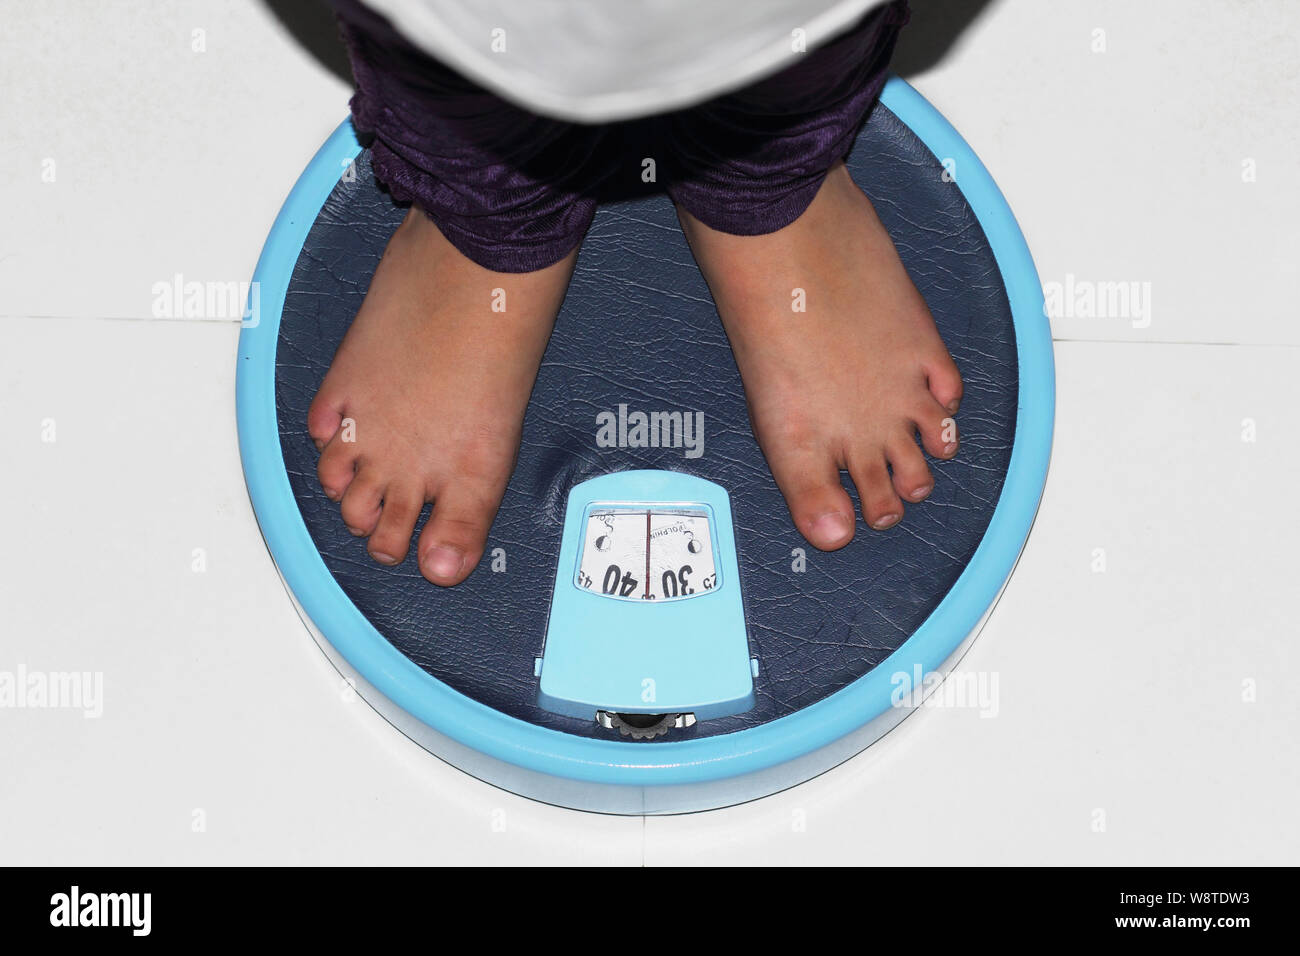 Child weighing itself on a bathroom scale Stock Photo